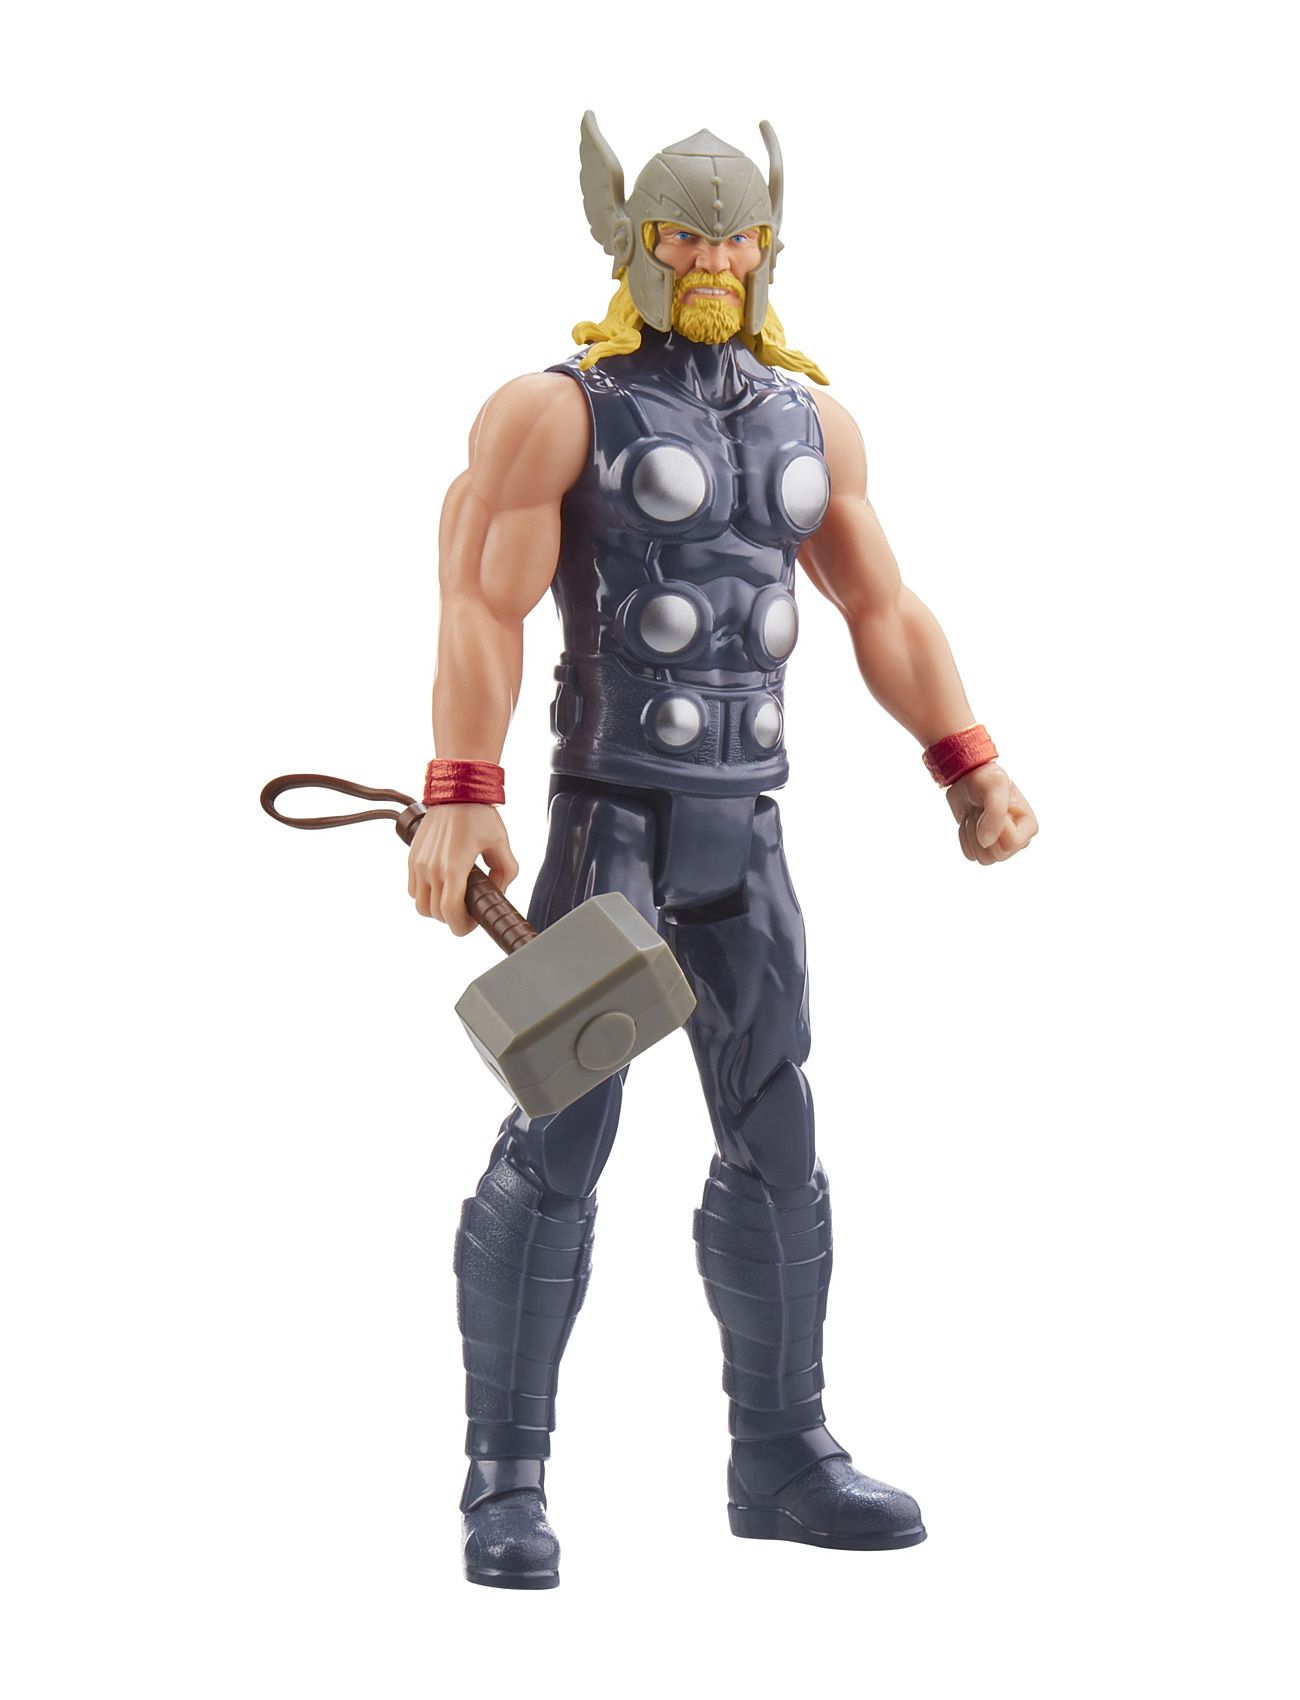 Marvel Avengers Titan Hero Series Thor Toys Playsets & Action Figures Action Figures Multi/patterned Marvel